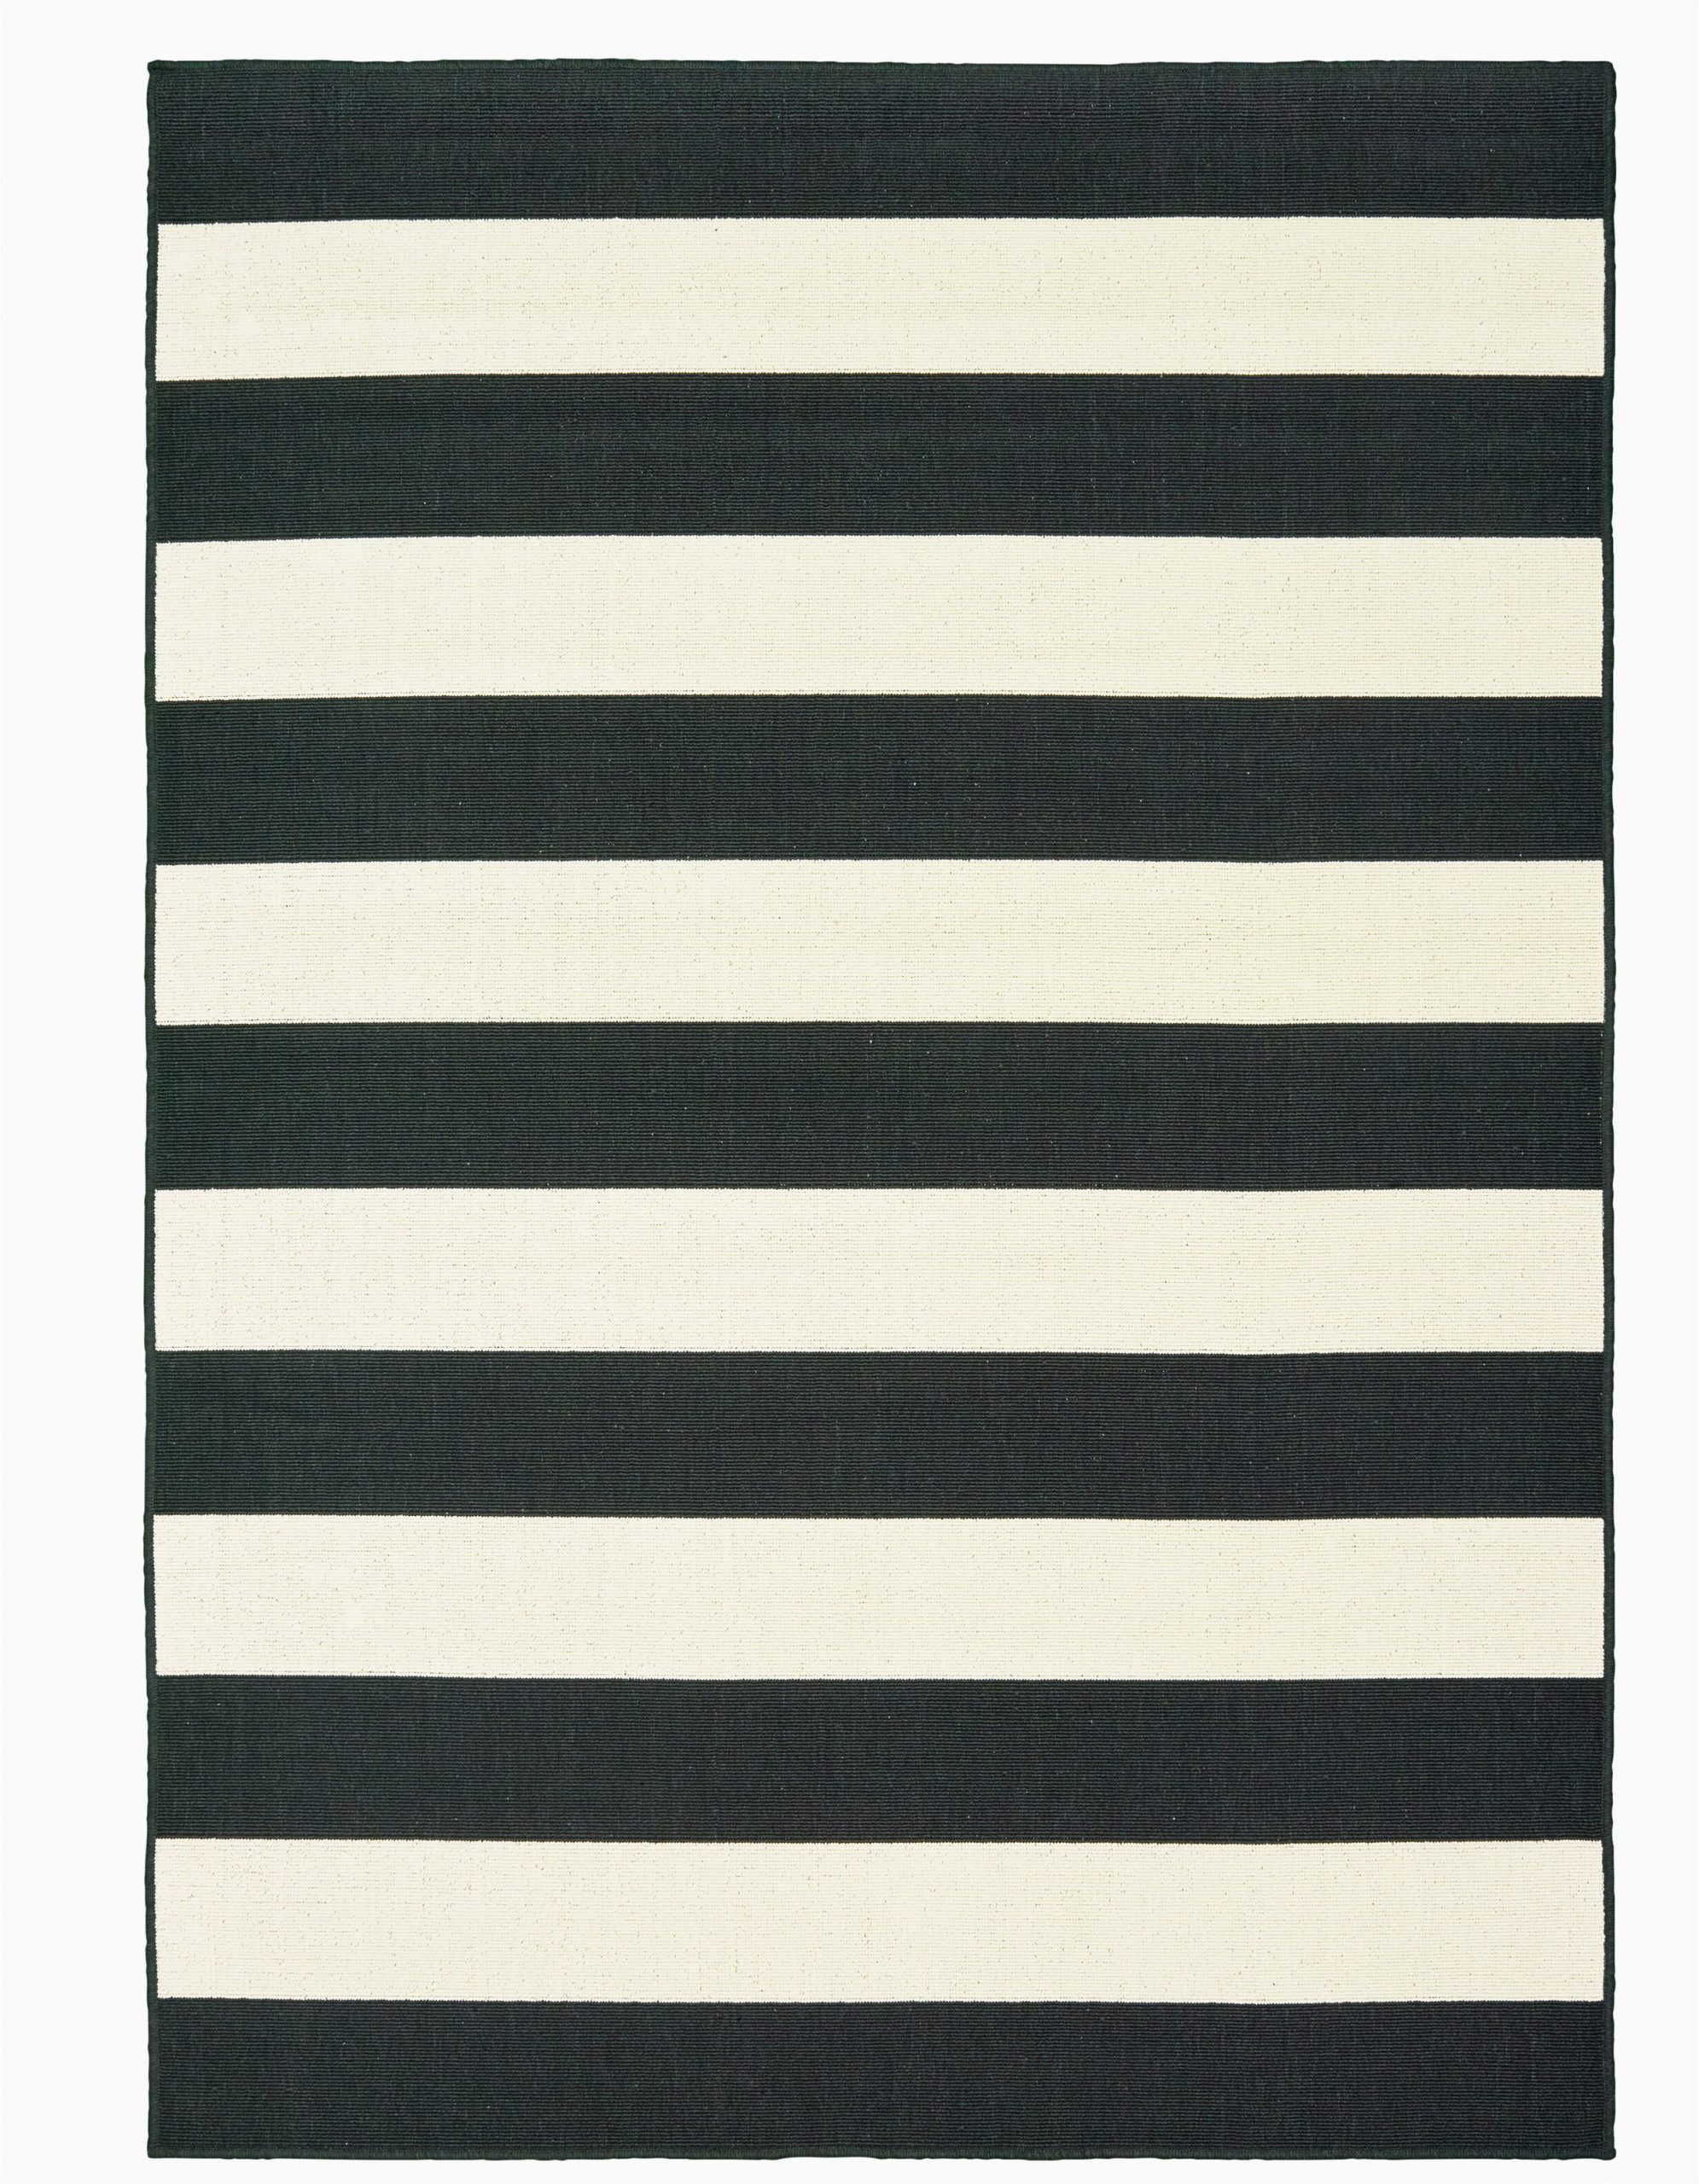 Black and Off White area Rugs Dian Striped Black Fwhite Indoor Outdoor area Rug